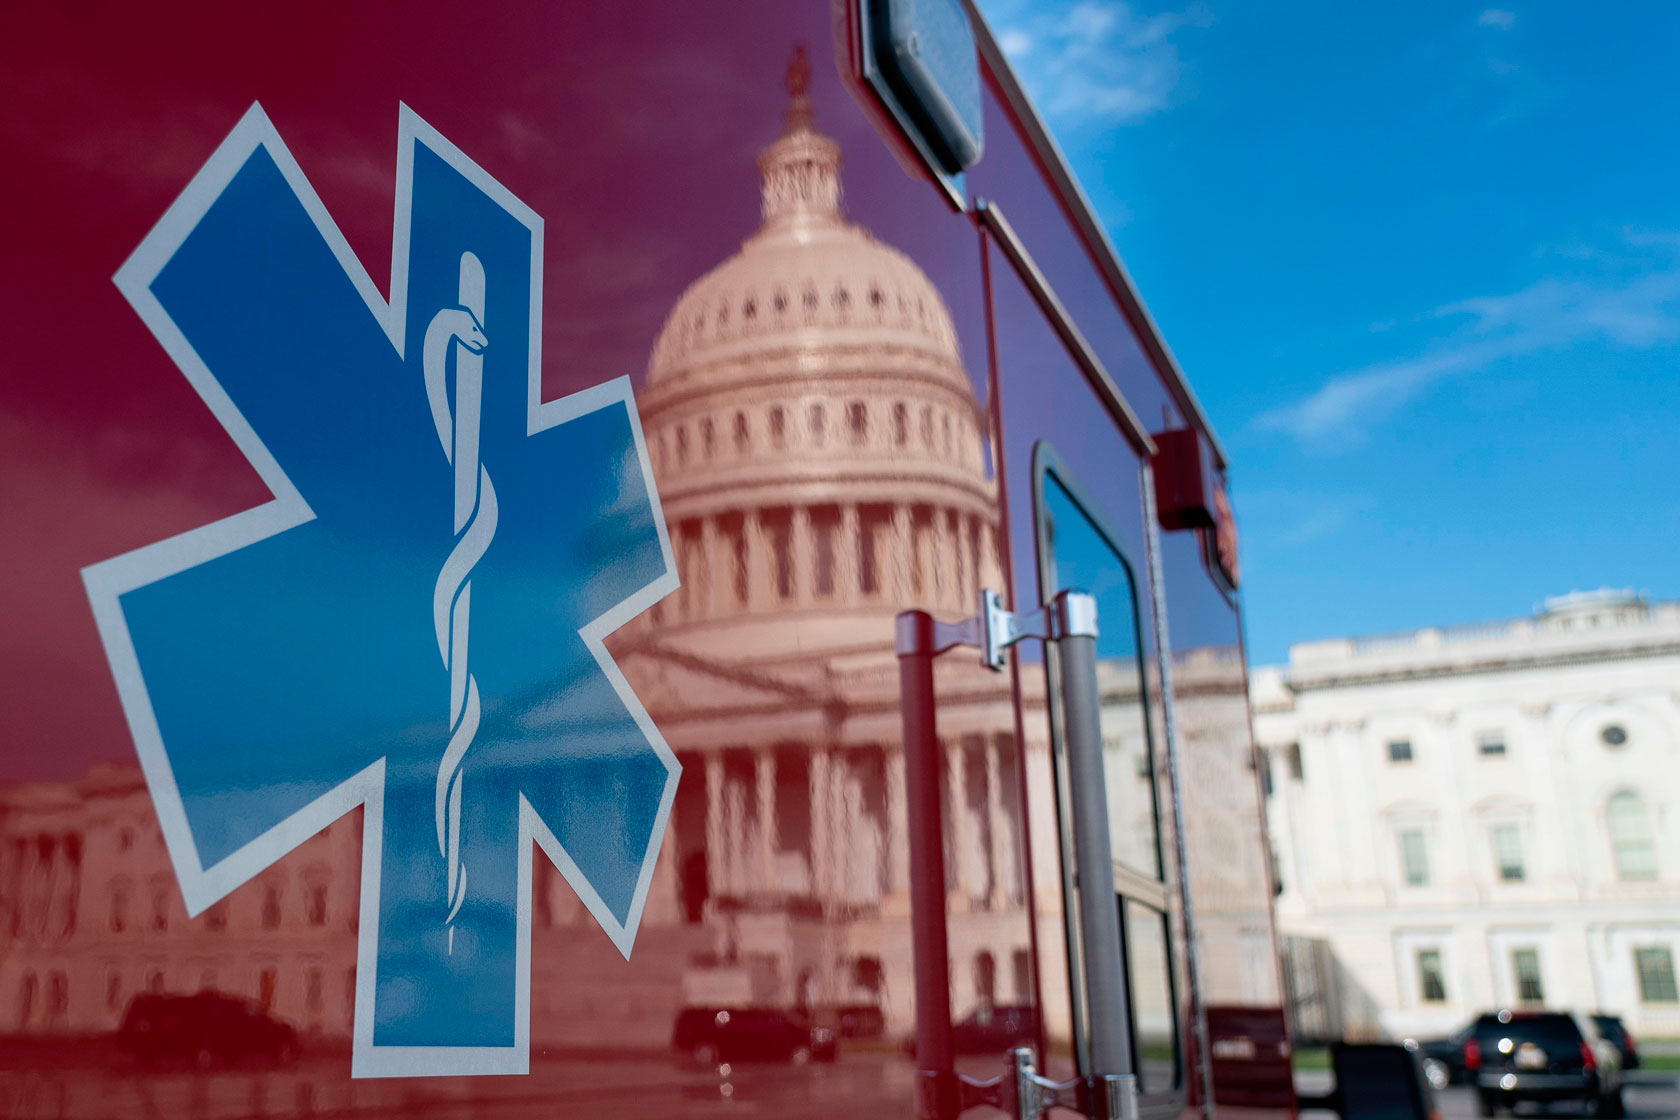 A reflection of the U.S. Capitol is seen on an ambulance.